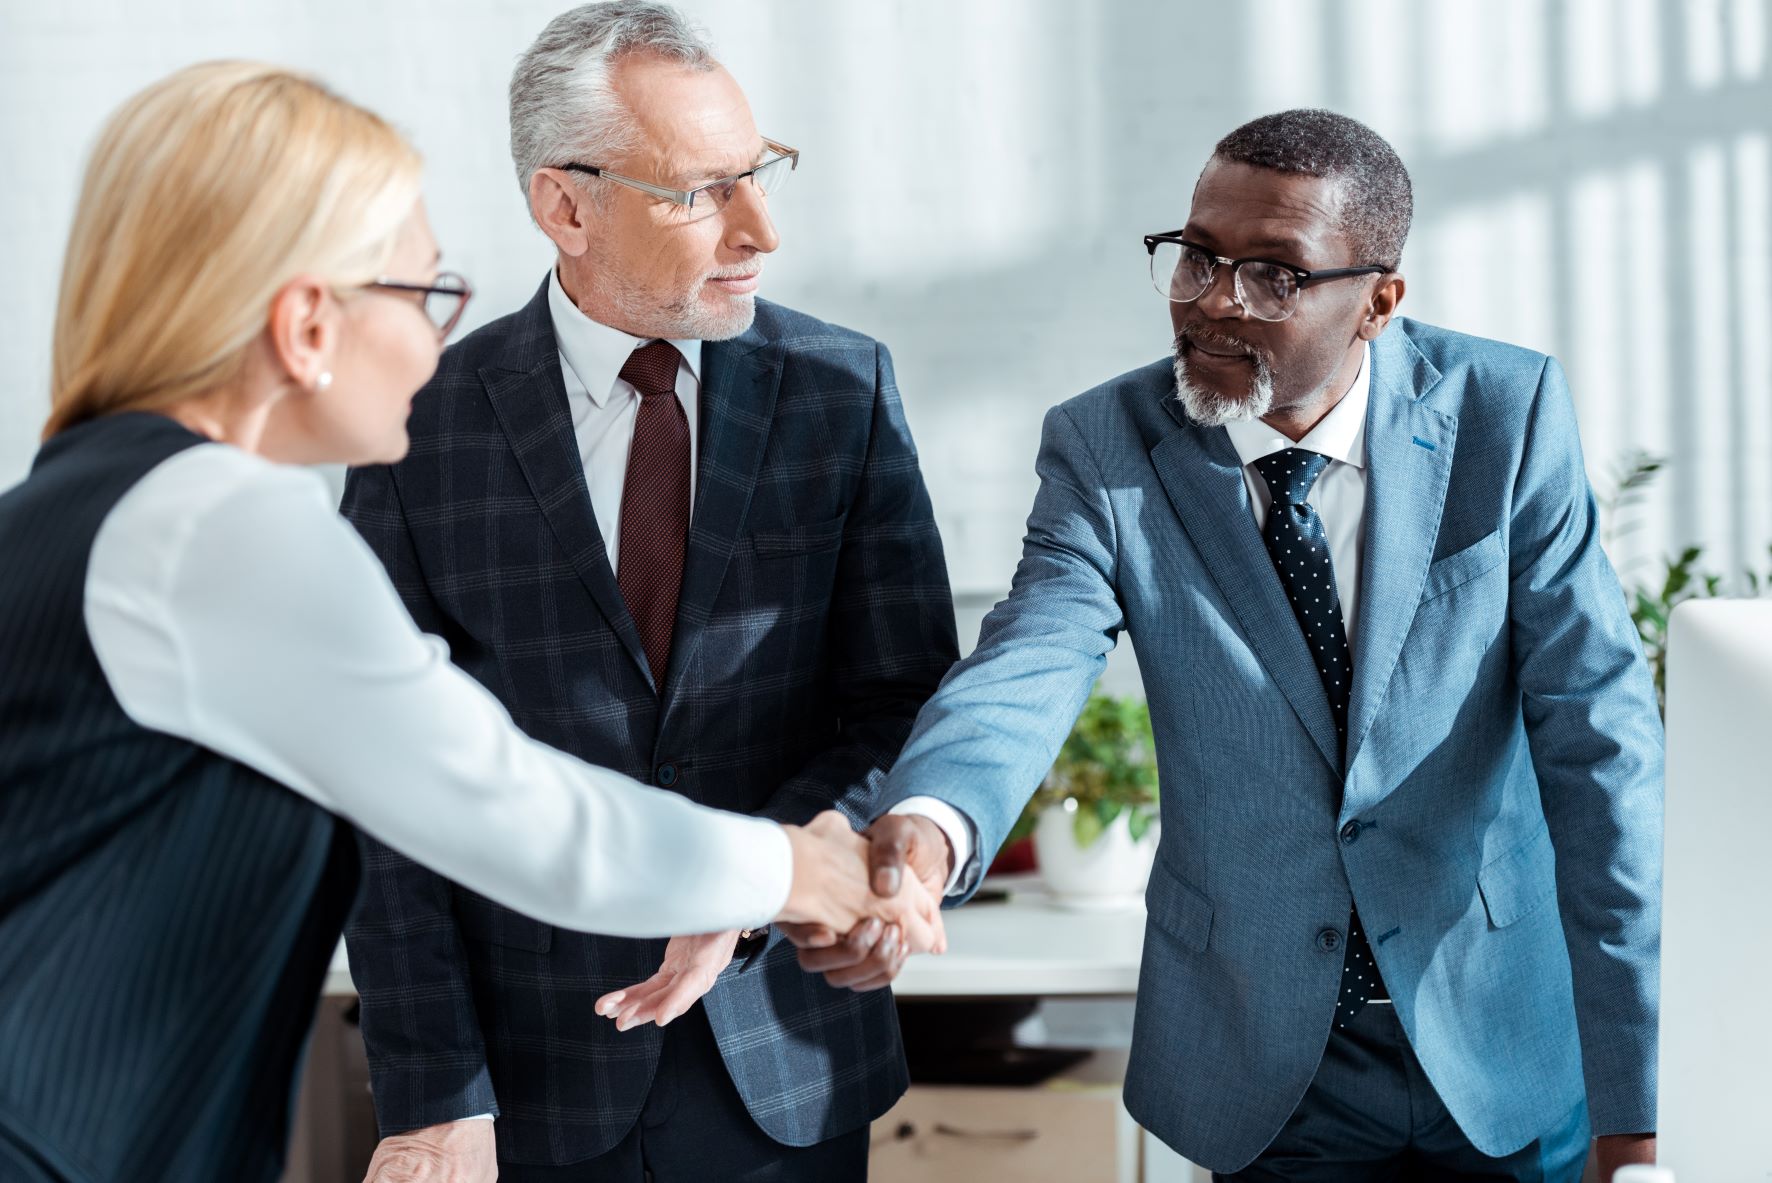 Business man shaking hands with blonde woman in office.